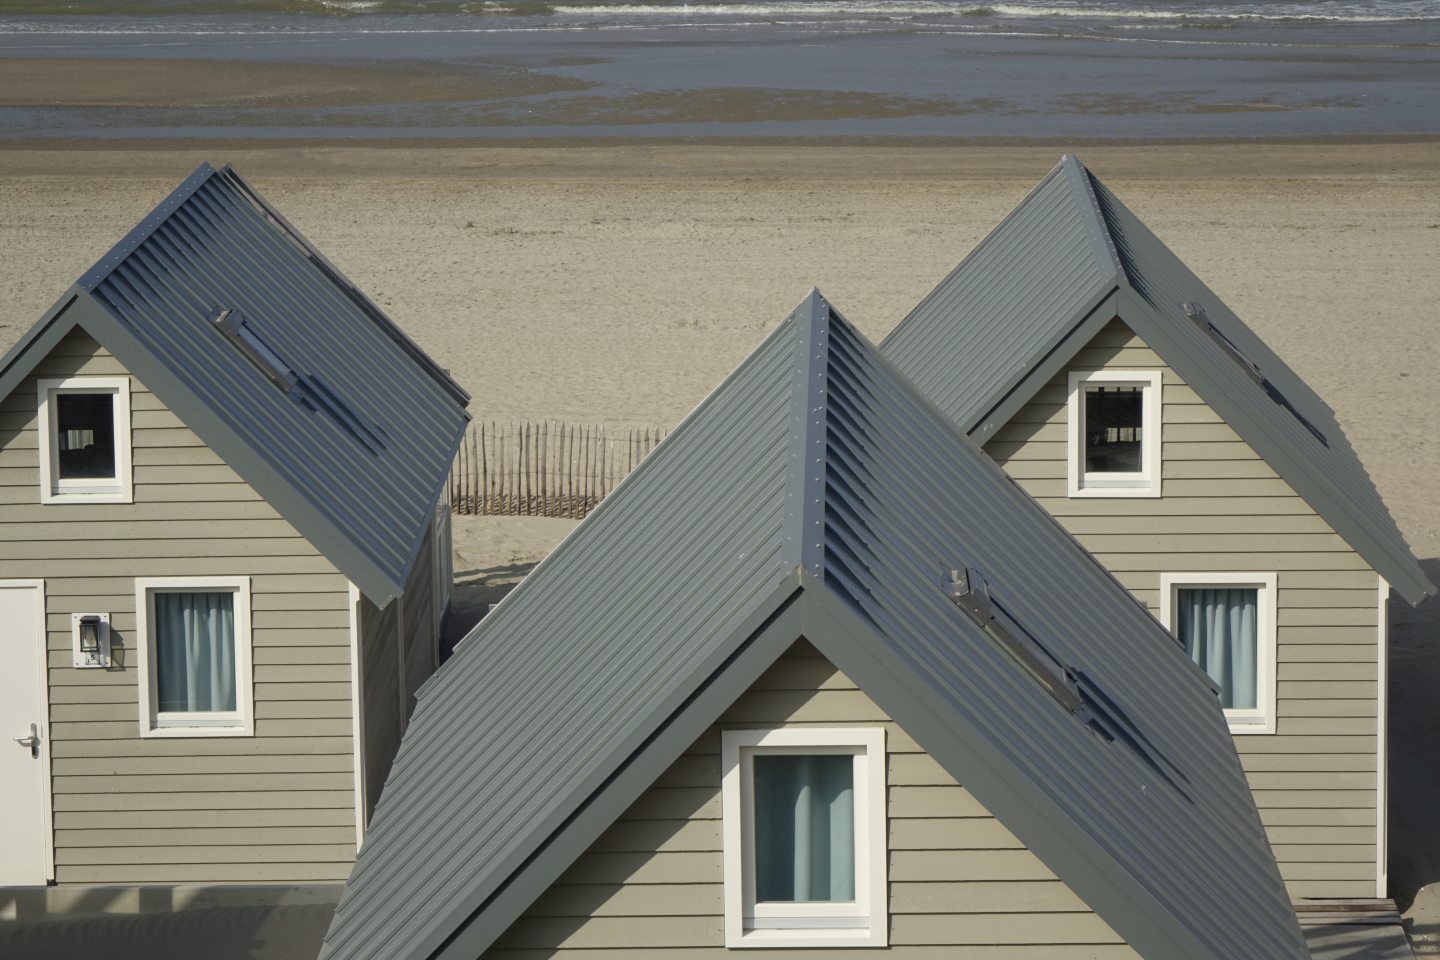 beach sheds with metal roofs